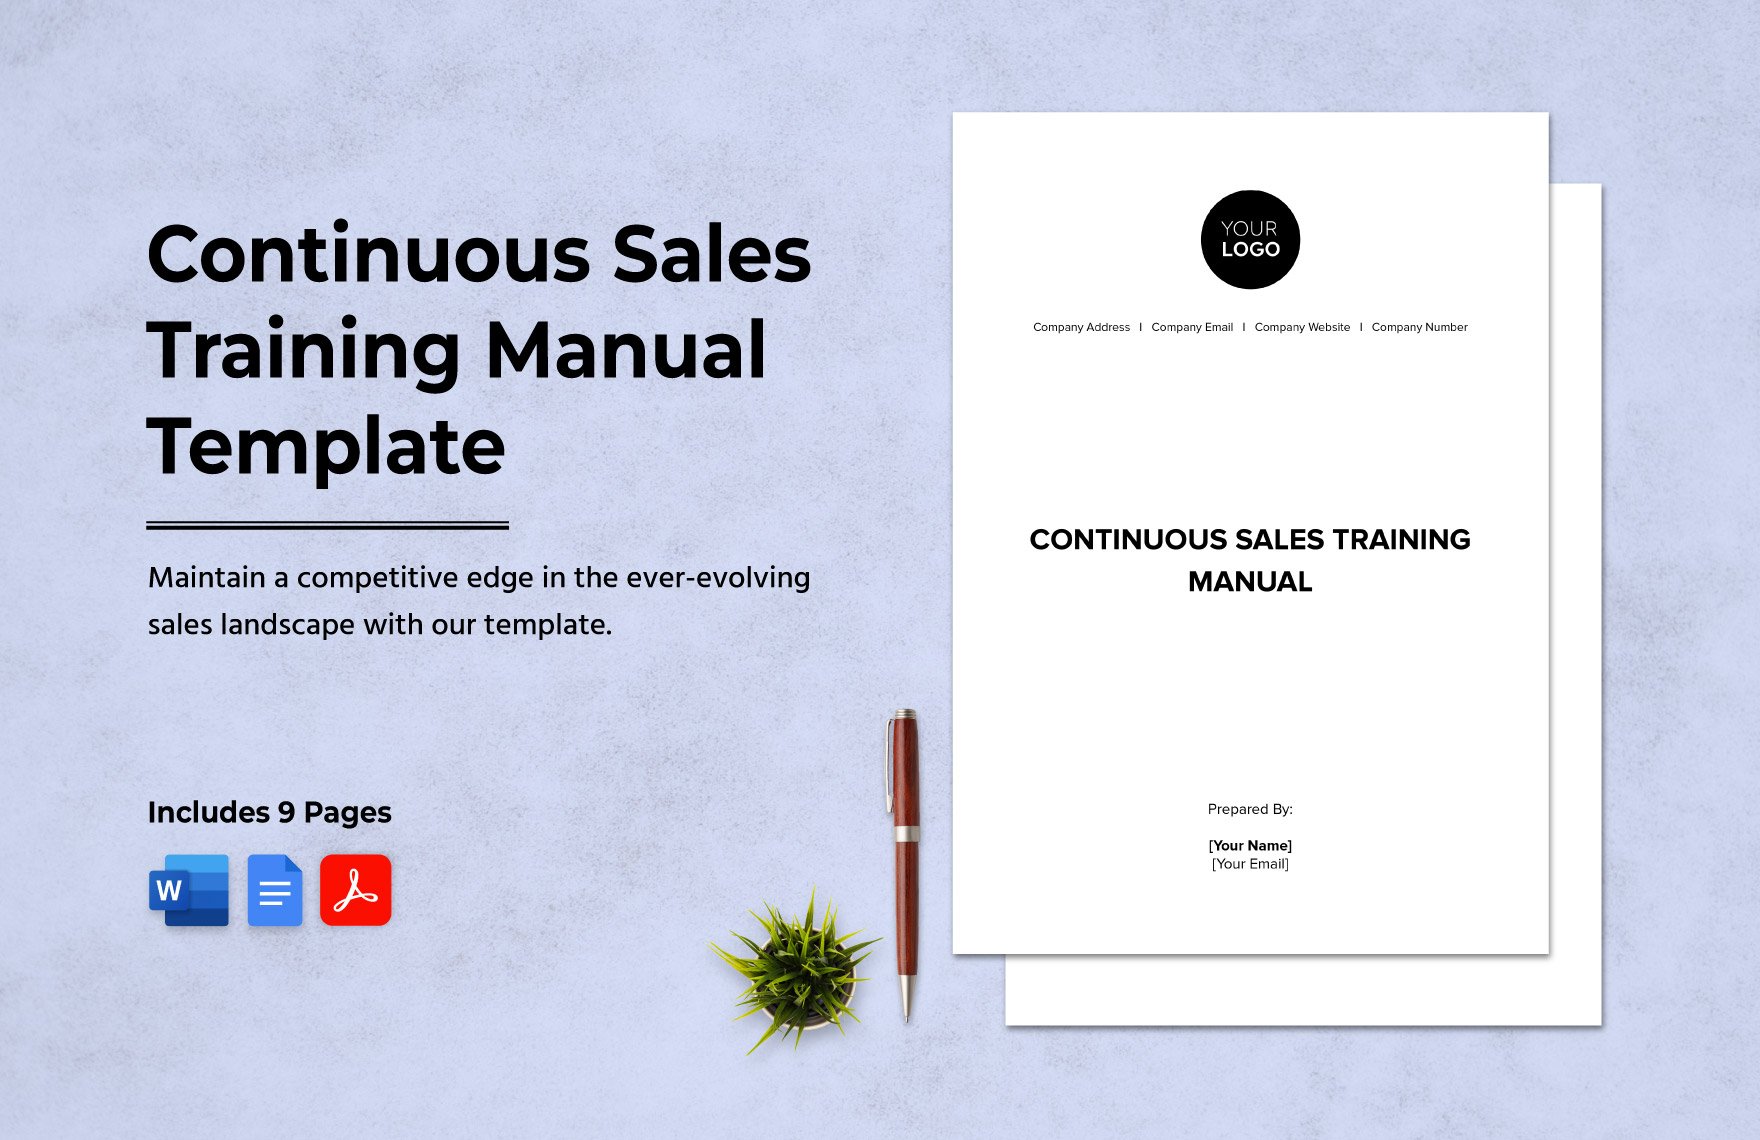 Continuous Sales Training Manual Template in Word, Google Docs, PDF